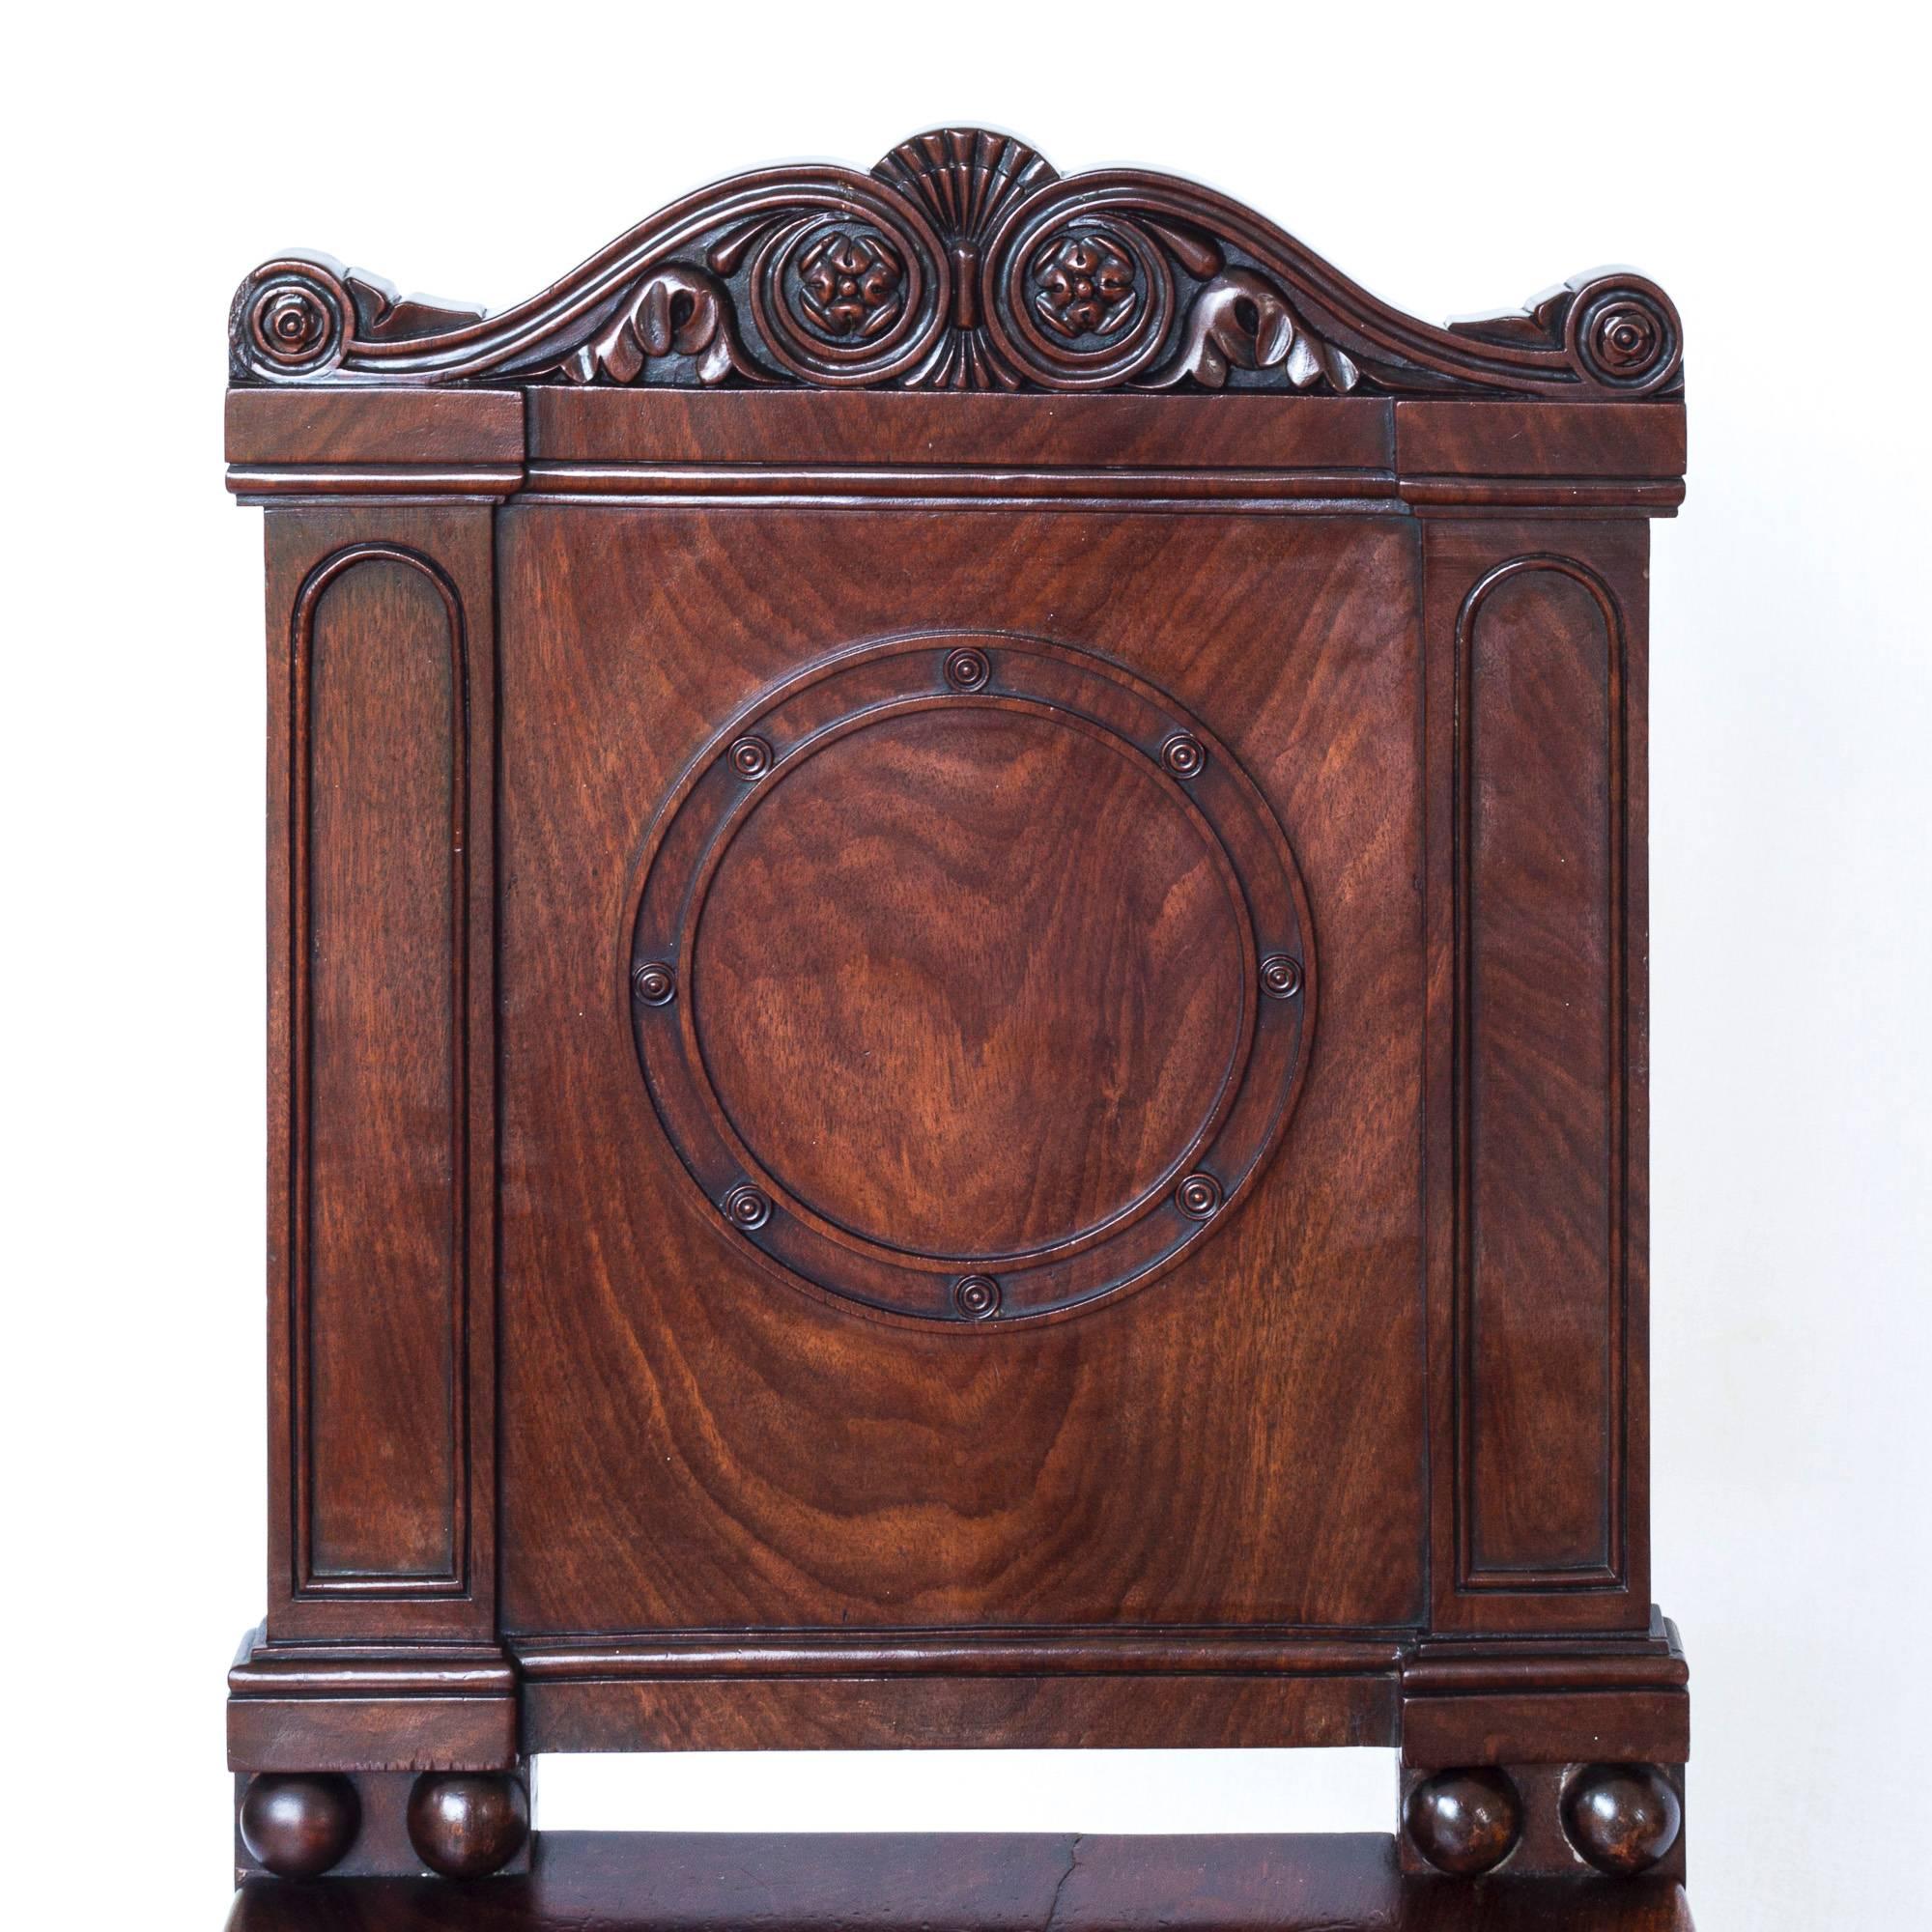 An exceptional example of late Georgian furniture in the ‘Antique’ style, almost certainly by the celebrated firm of Gillows of Lancaster and London, undoubtedly influenced by the ‘Antique’ style, favoured by Charles Heathcote Tatham, Thomas Hope